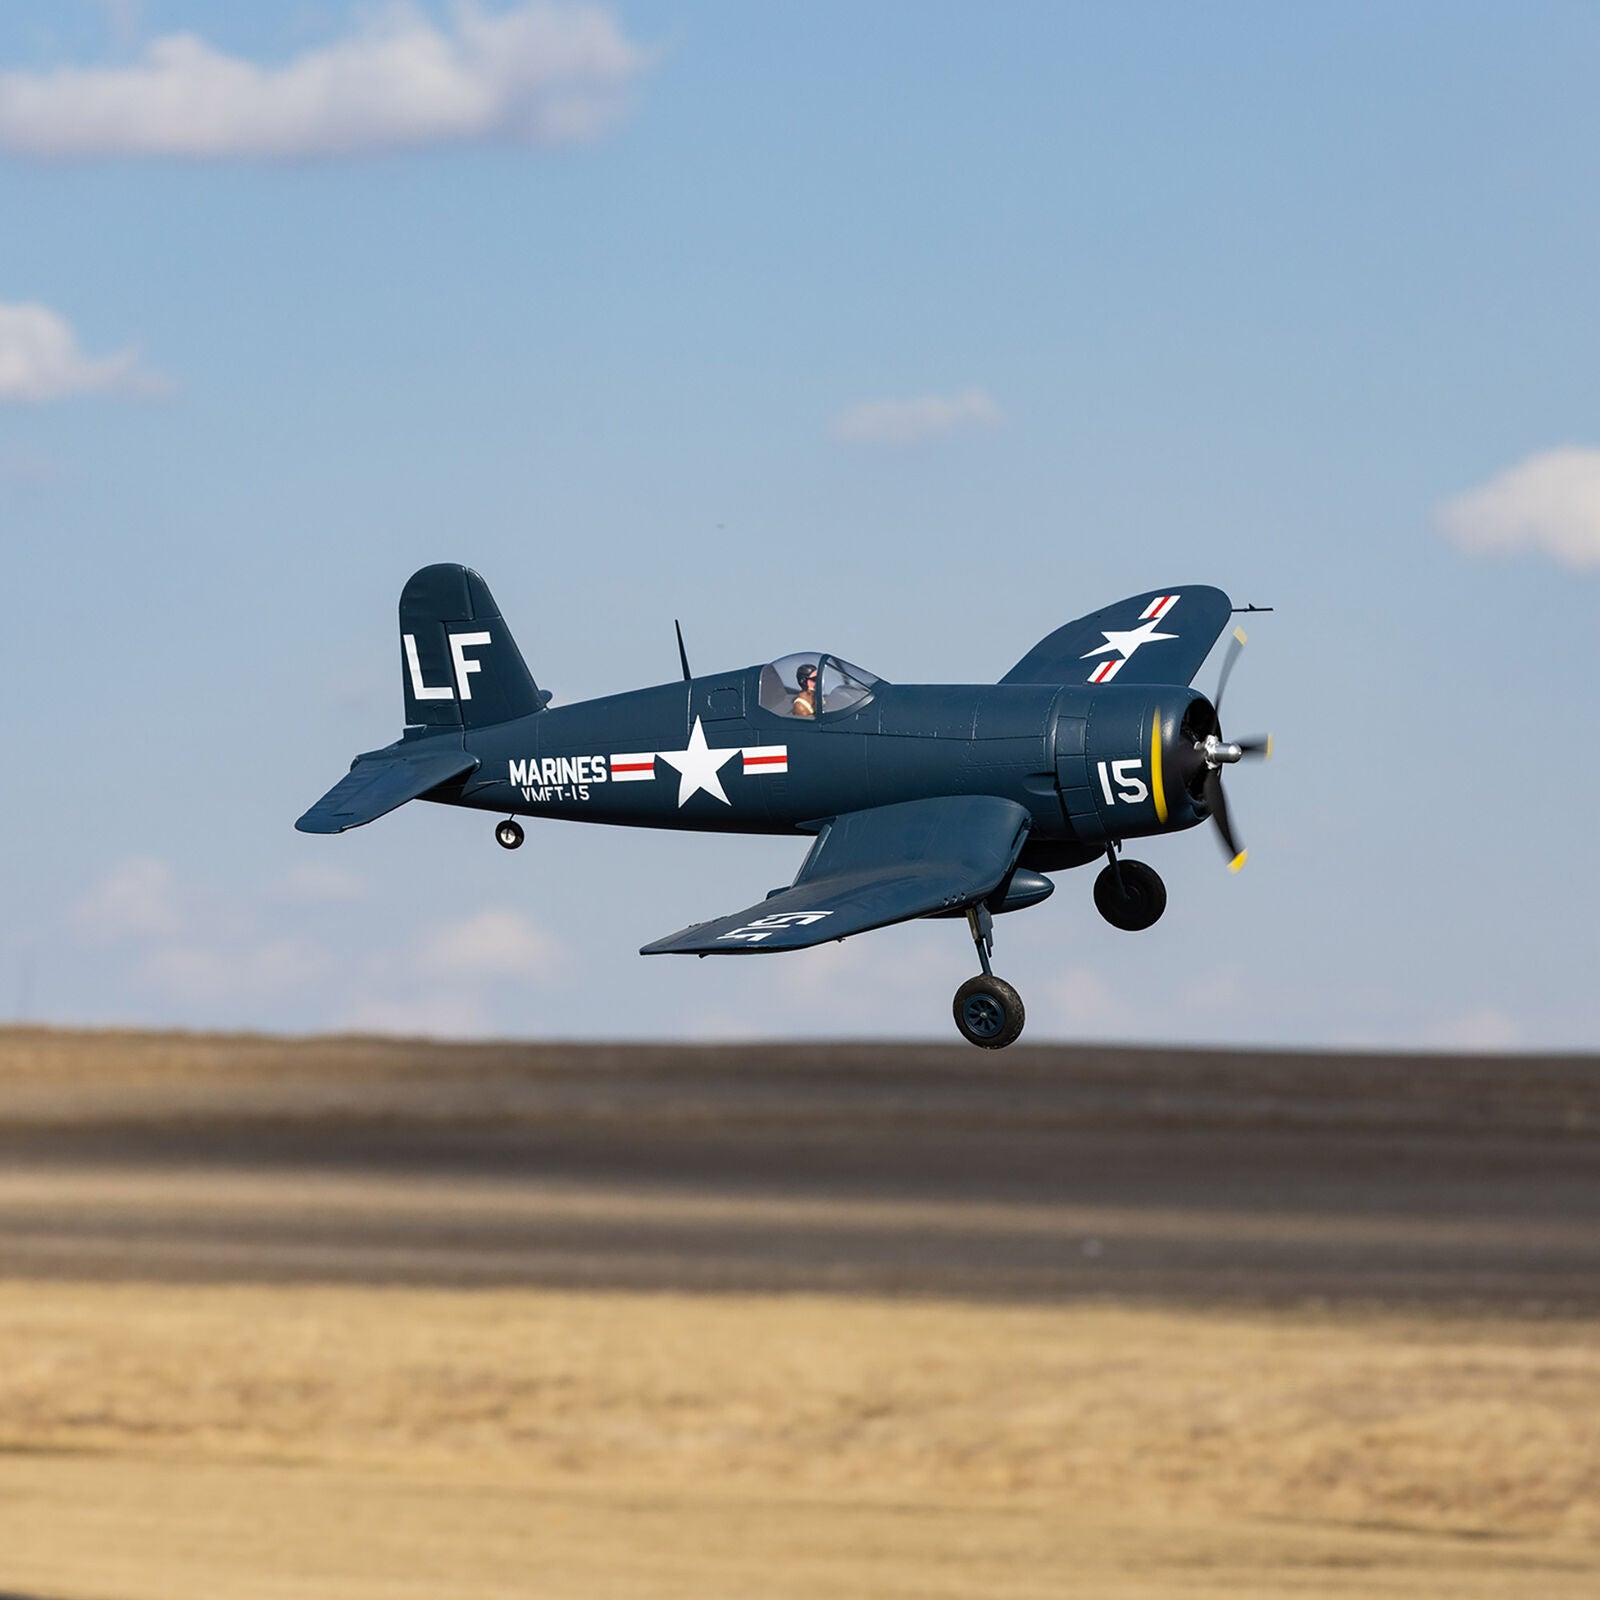 E-flite F4U-4 Corsair 1.2m BNF Basic with AS3X and SAFE Select - EFL18550